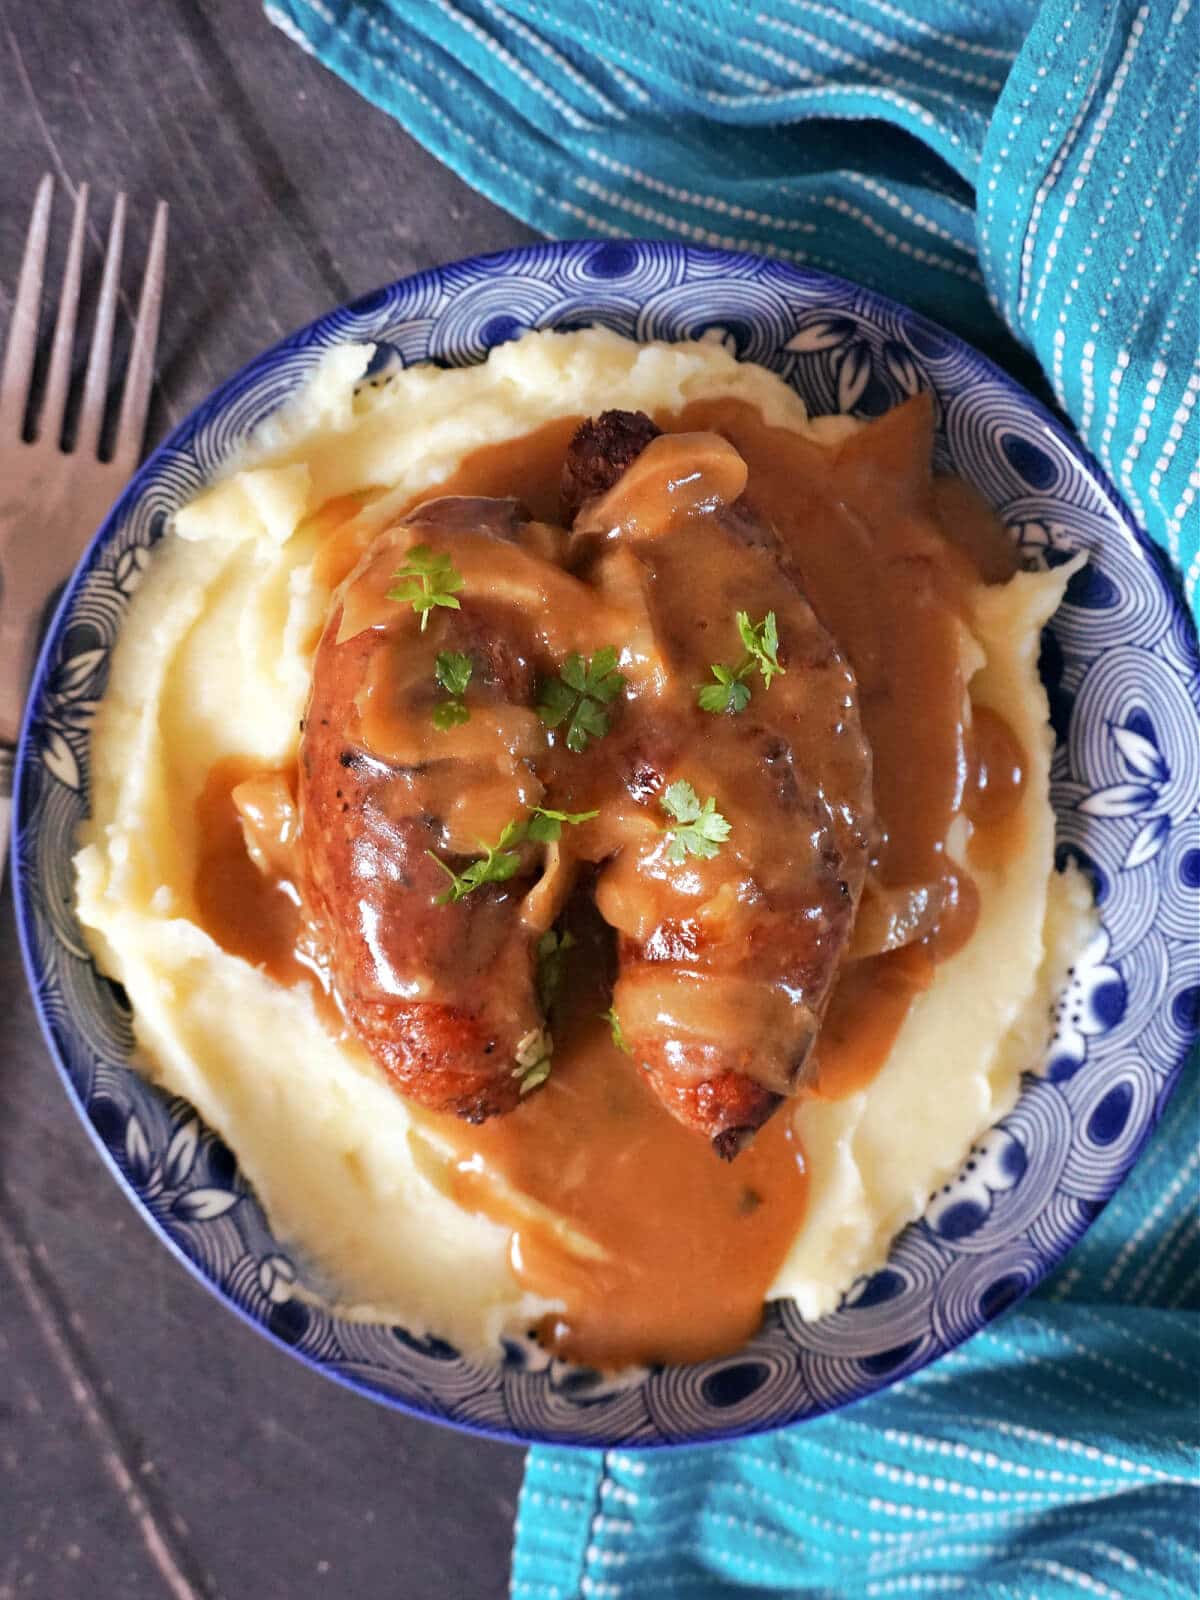 Overhead shot of a blue plate with mash, 2 sausages and gravy.